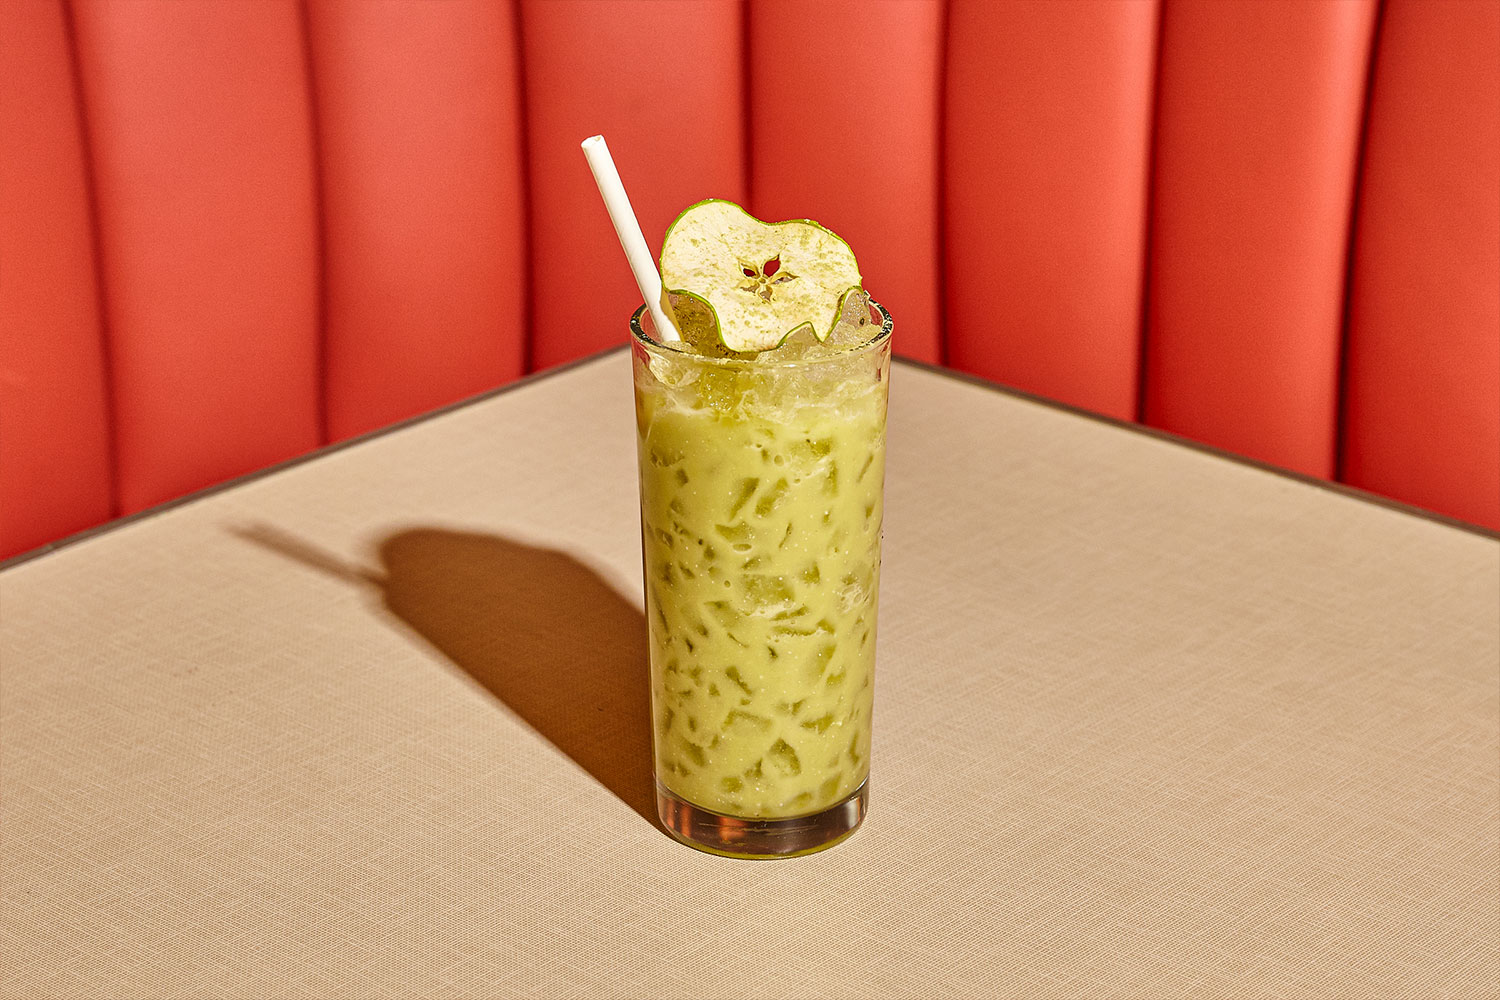 A green cocktail with a white flower garnish sits on a Soho Diner booth table